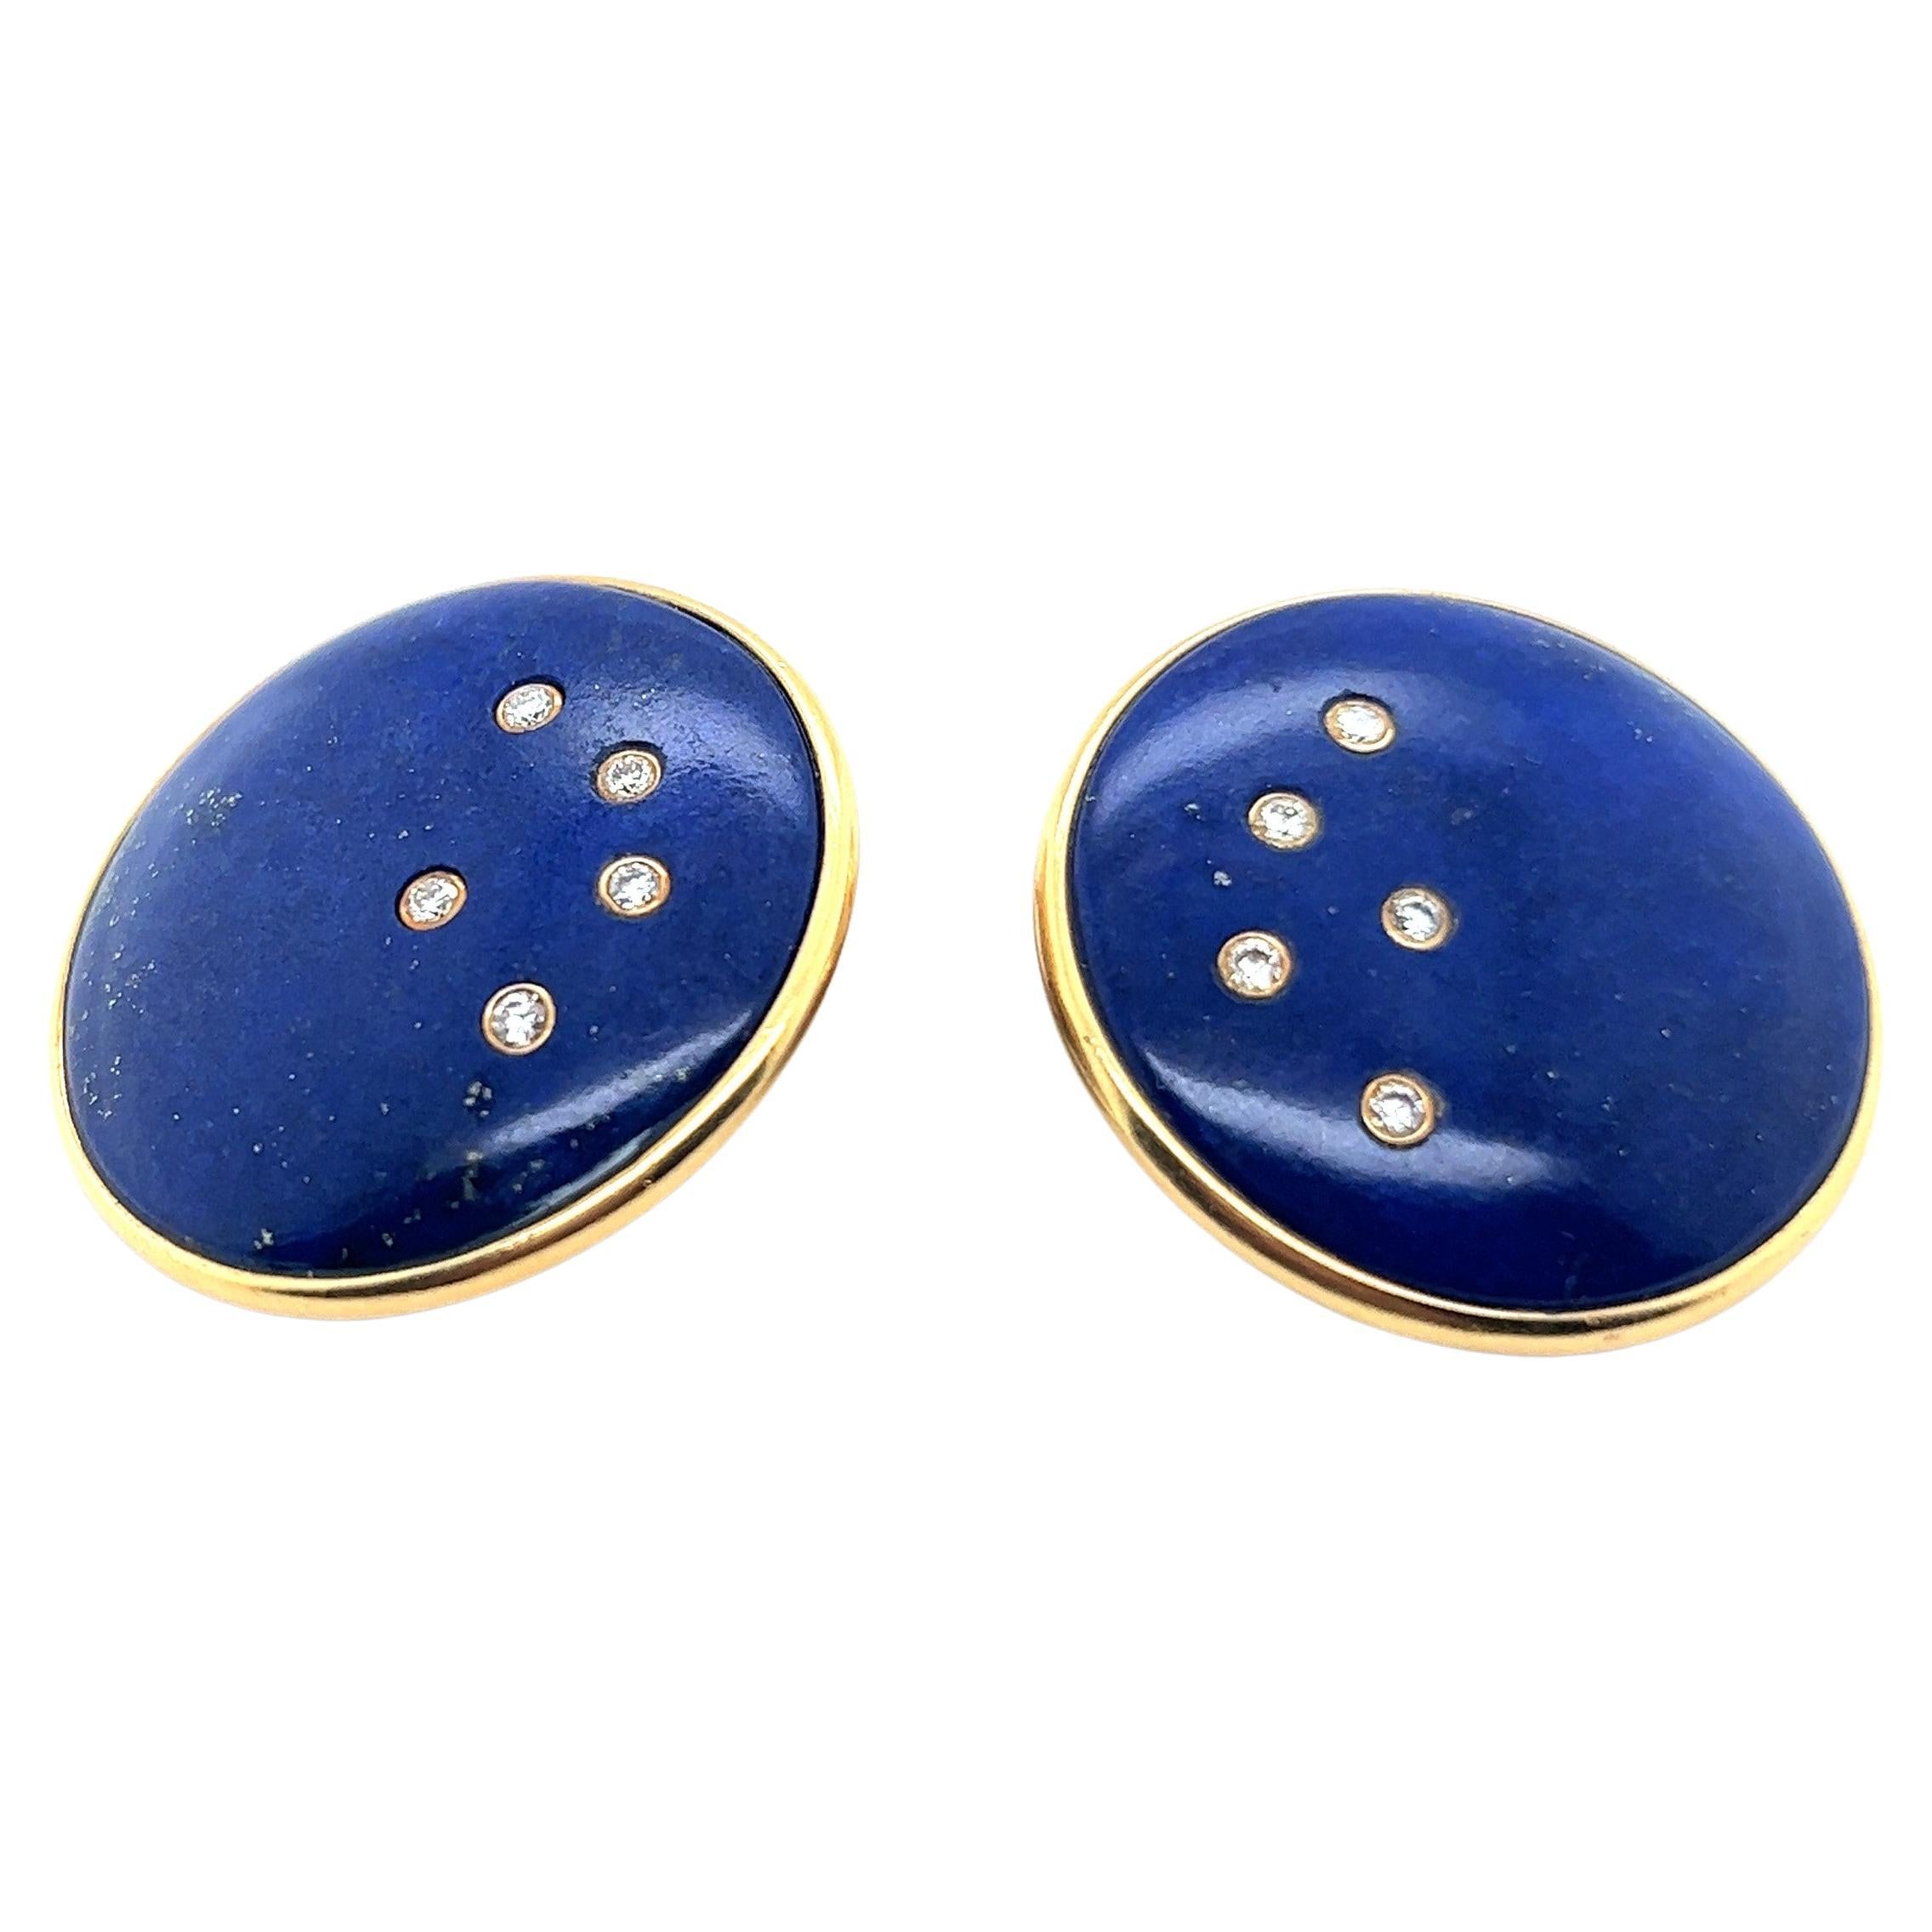 Exceptional Lapis lazuli earrings in yellow gold by Swiss jeweller Robert Vogelsang.

Designed with 18 Karat Yellow Gold, these earrings exude an enchanting and timeless appeal.  The rich blue of Lapis lazuli pairs beautifully with 10 brilliant cut